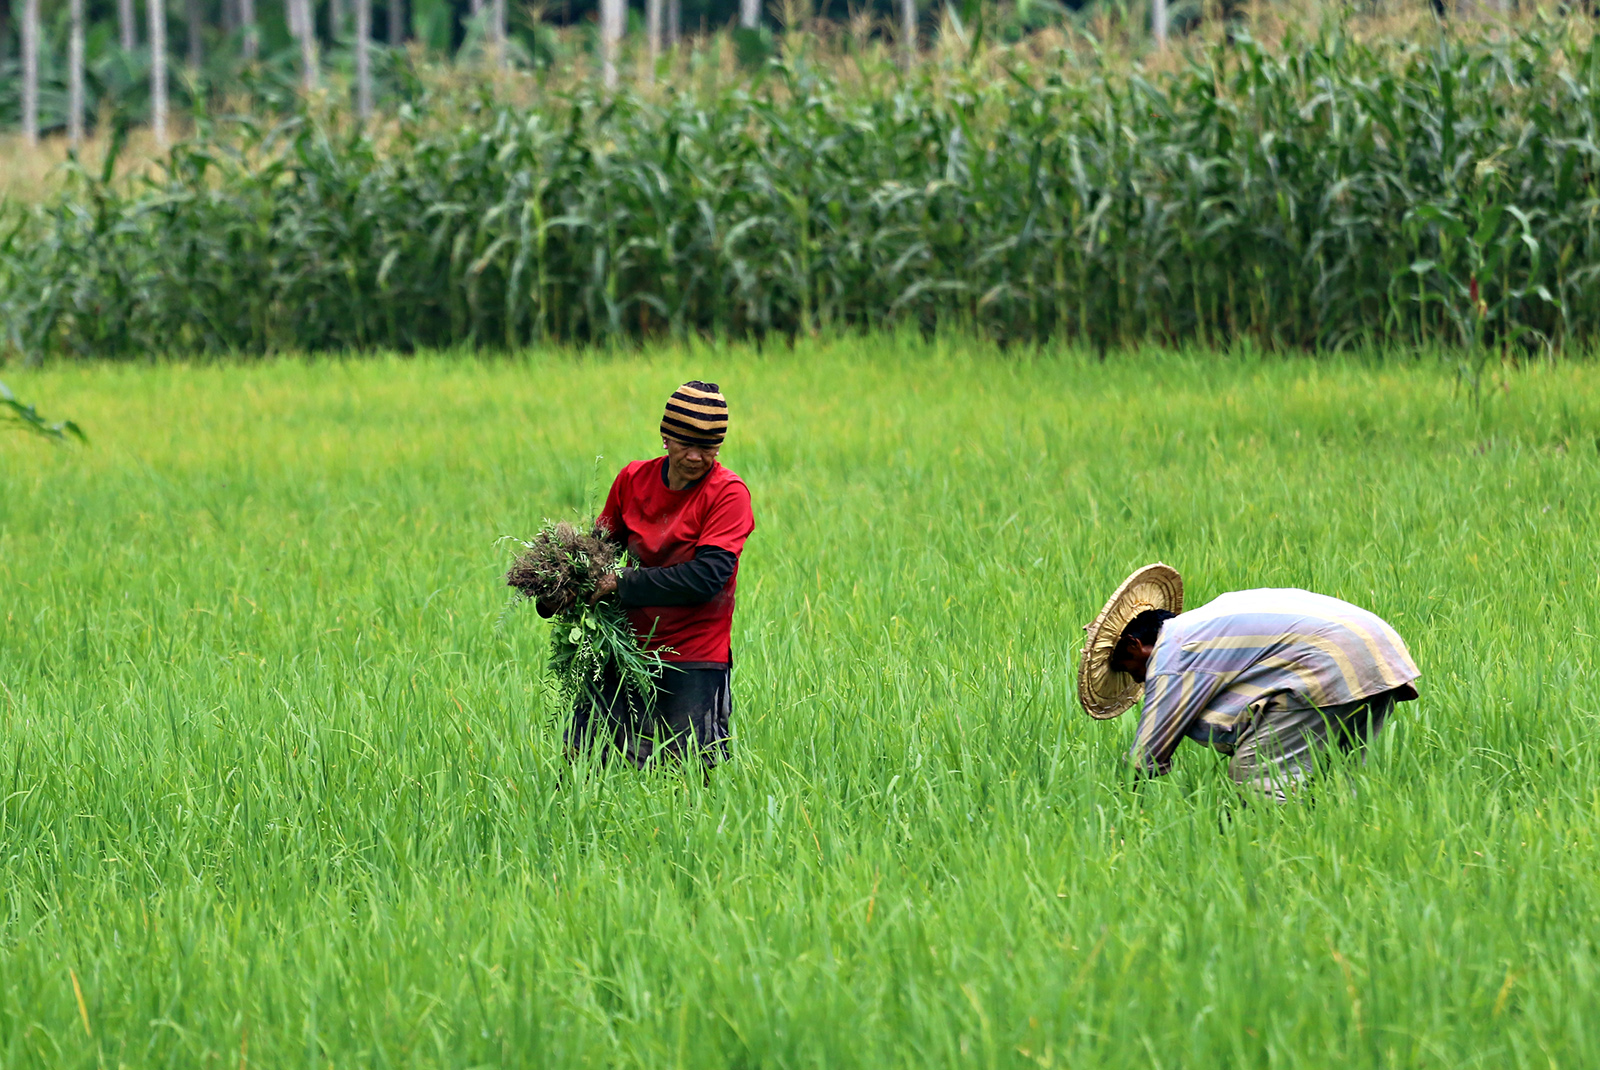 Gov’t won’t allow rice imports during harvest season – Palace